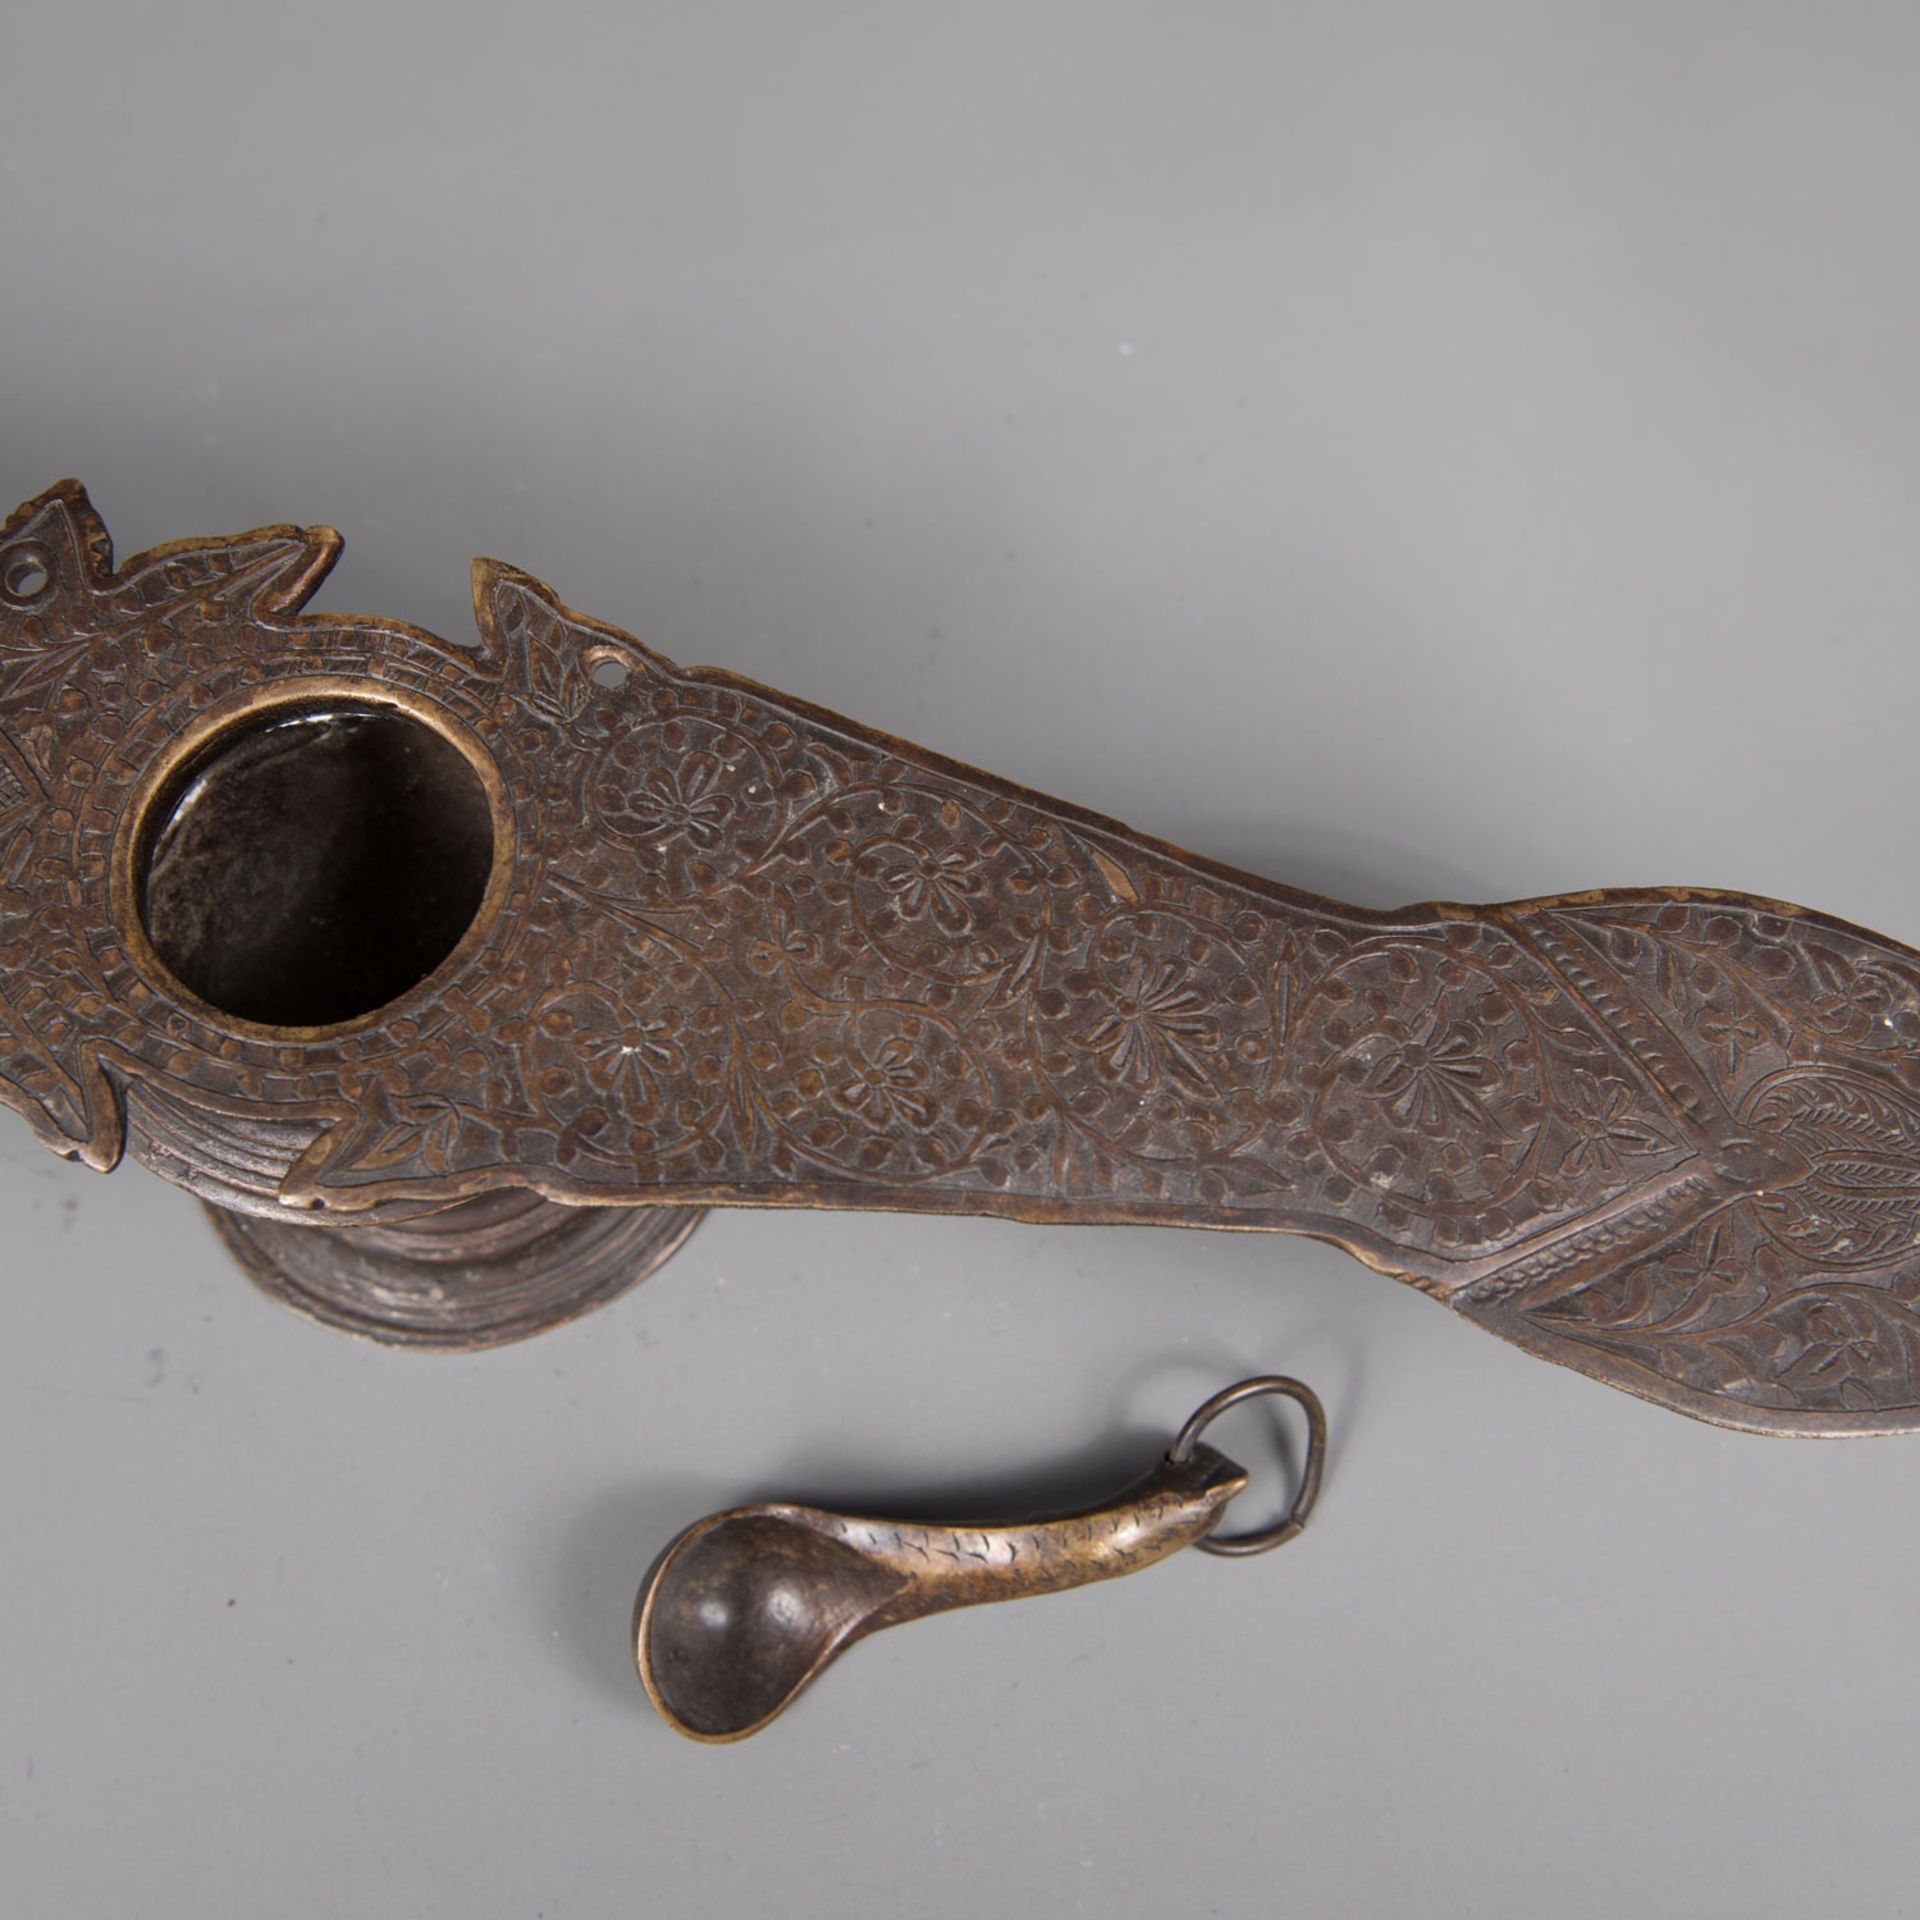 Indochinese oil lamp - Image 2 of 3